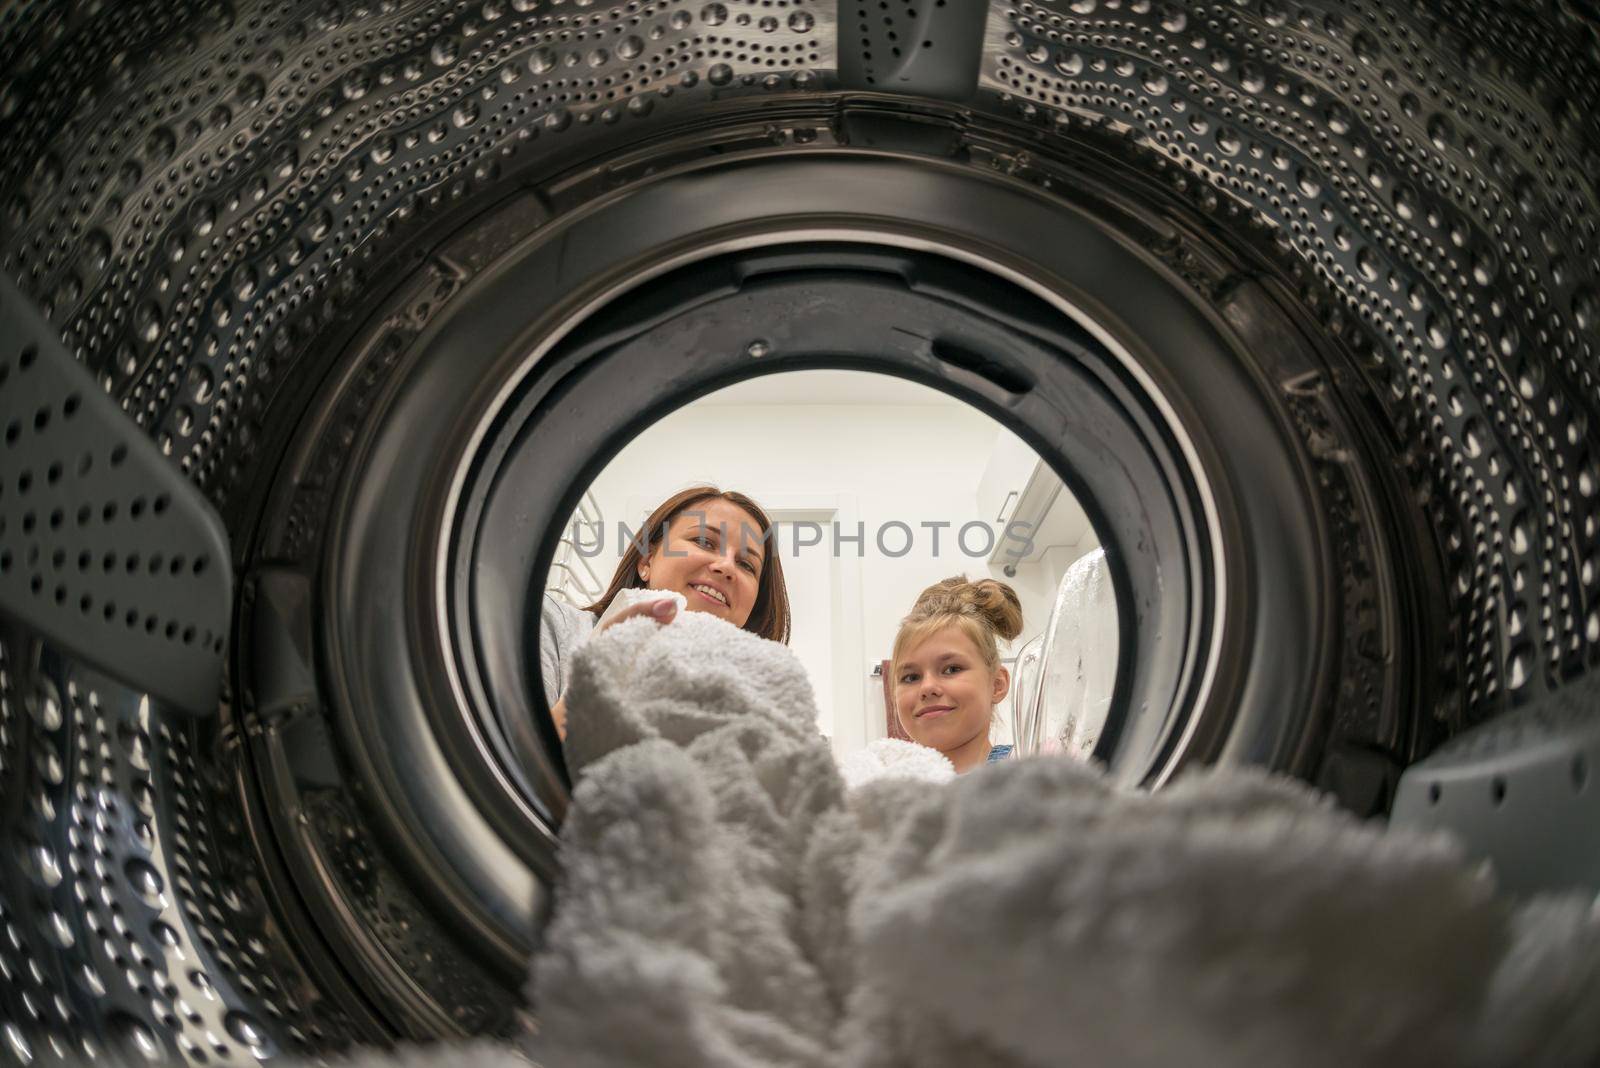 Woman Doing Laundry with her daughter Reaching towel Inside Washing Machine, view from inside by Mariakray